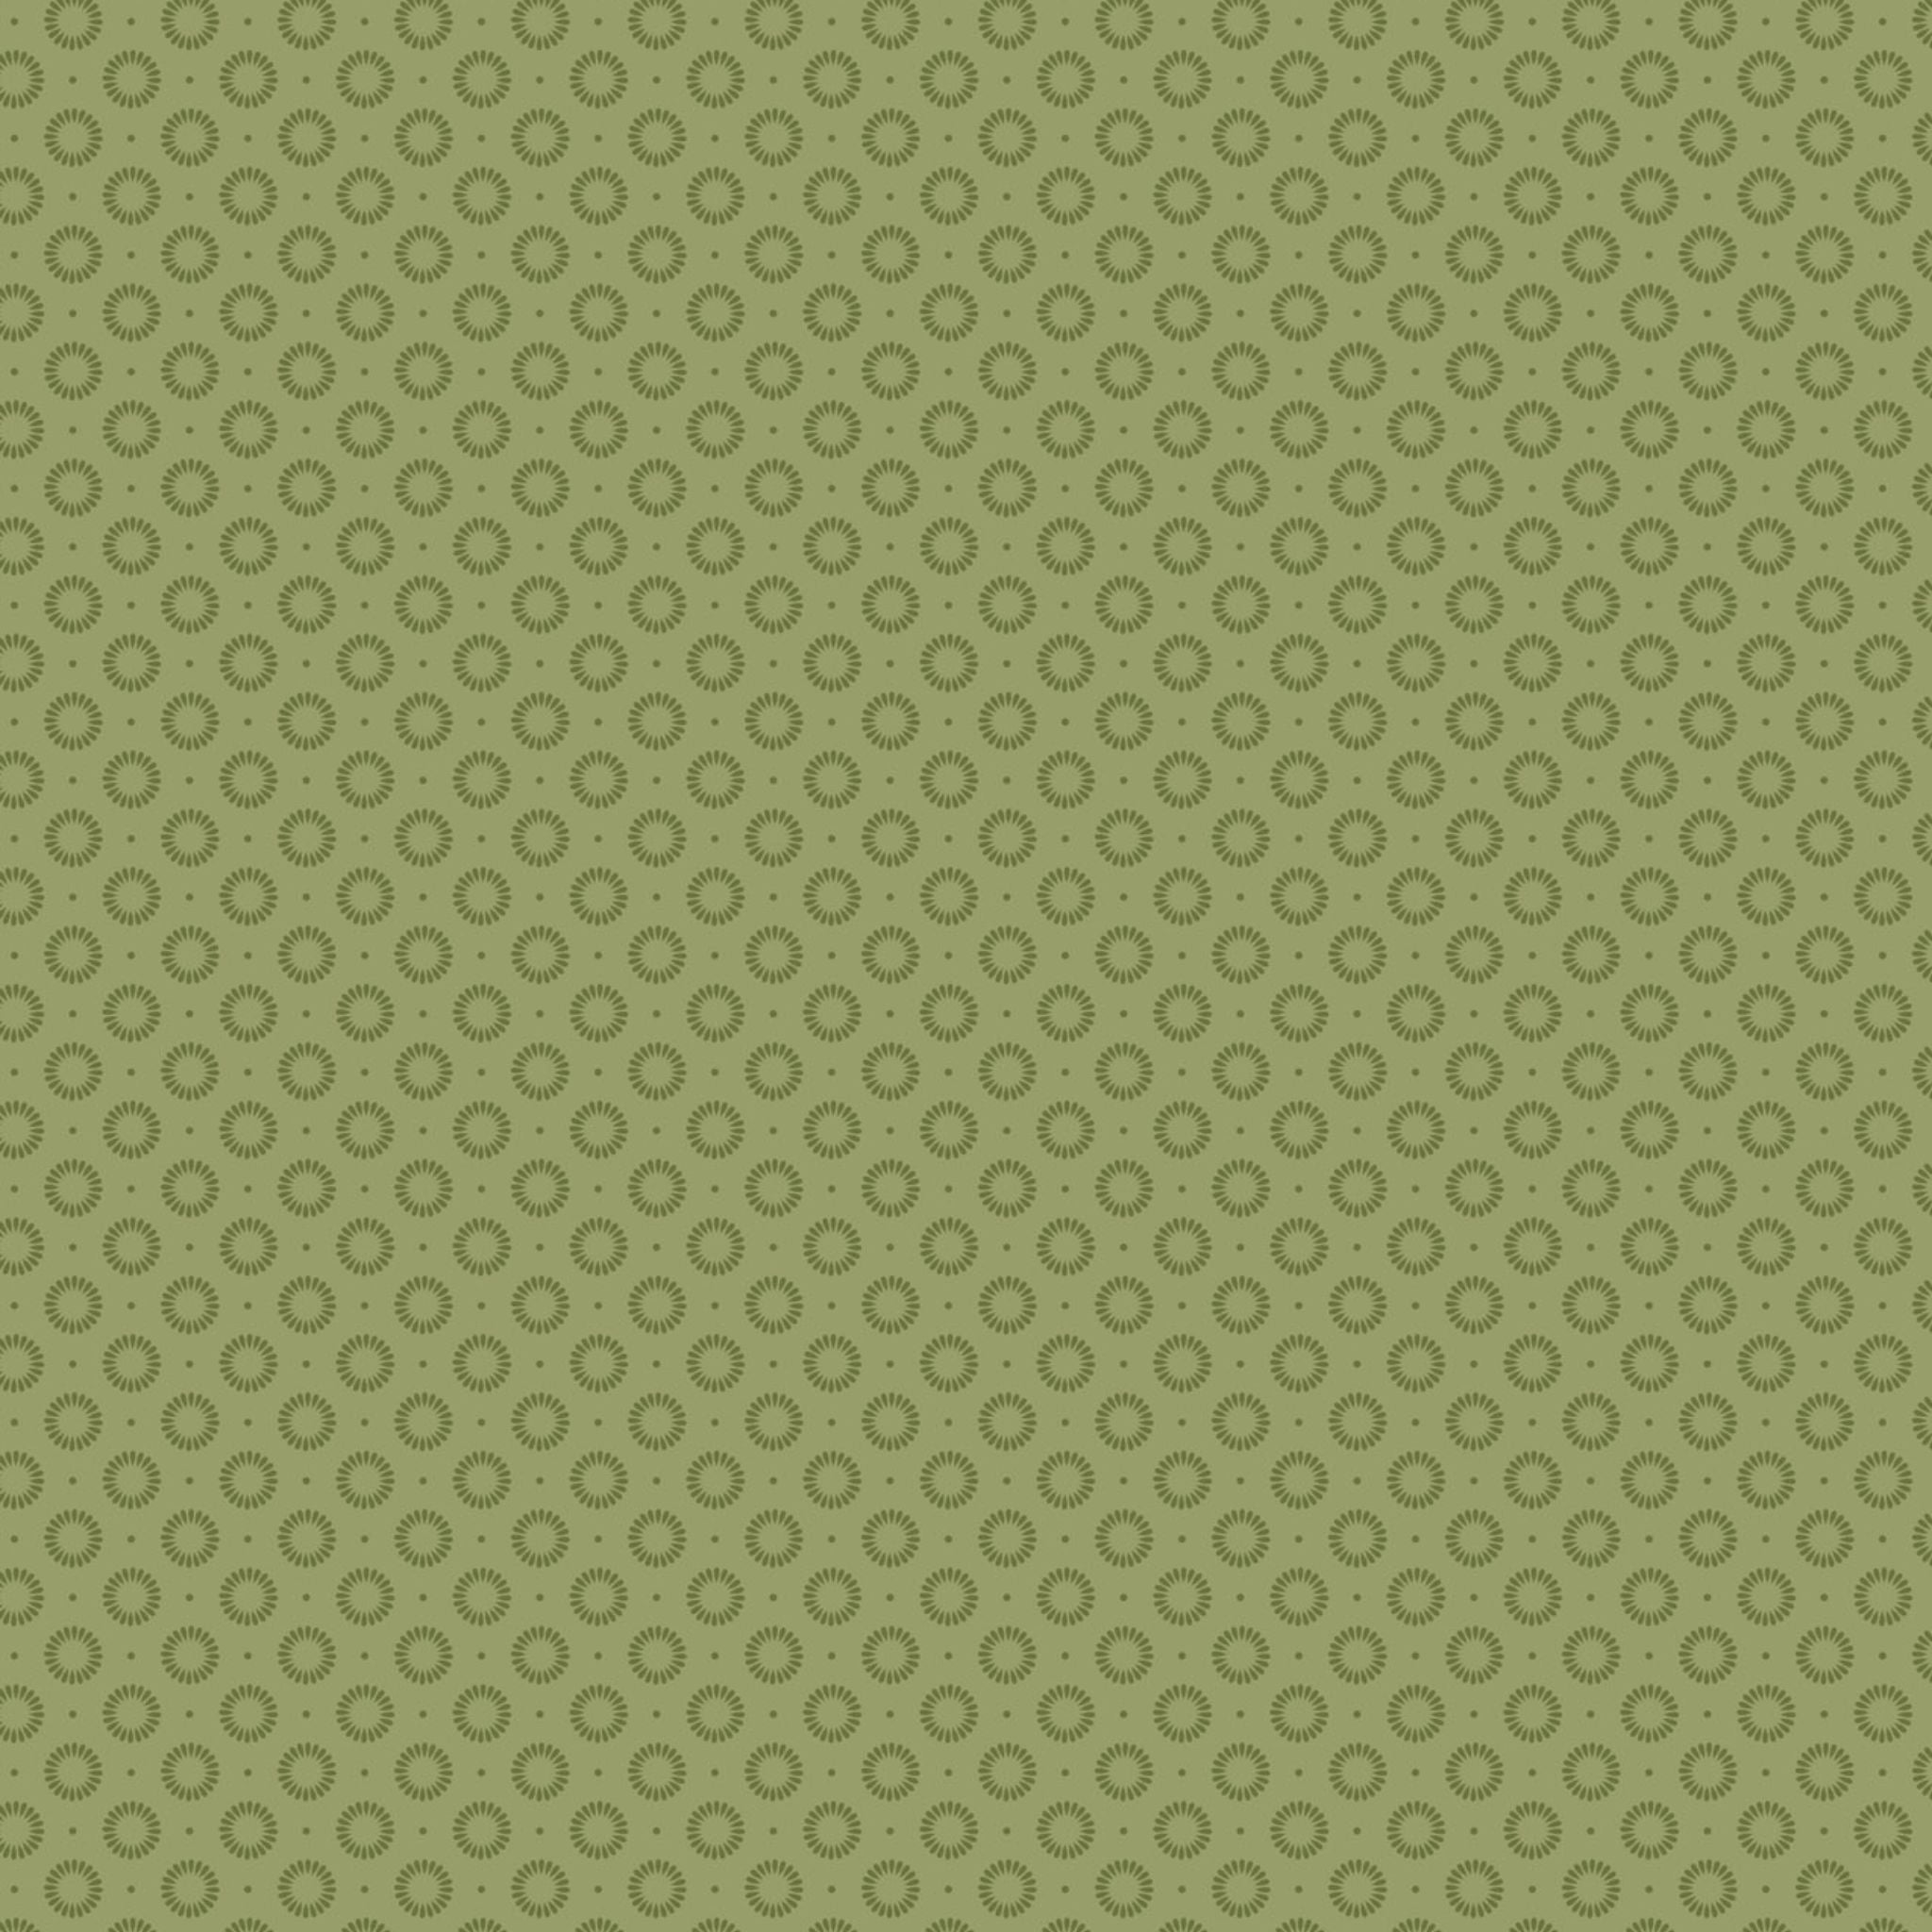 Flower dot fabric on deep green - Grandmas Quilts by Lewis and Irene